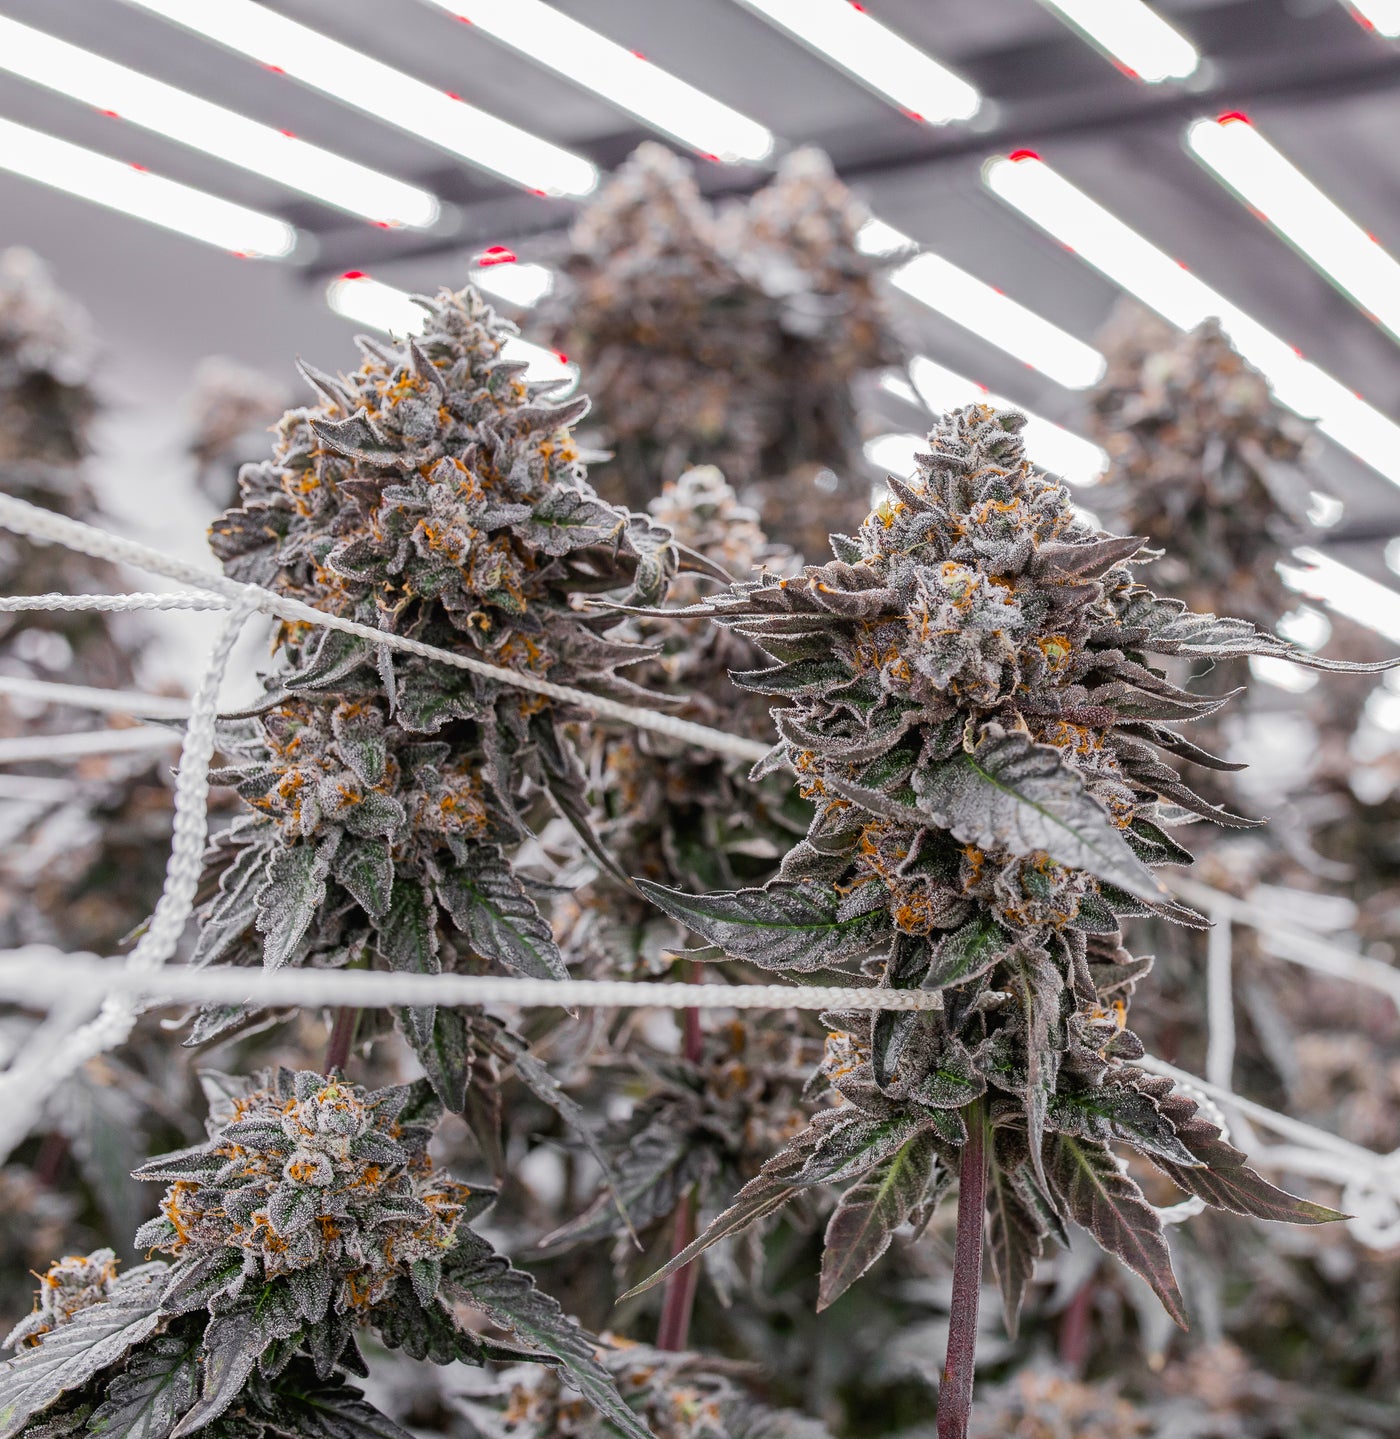 The best cannabis strains grown indoors are properly dried and cured.